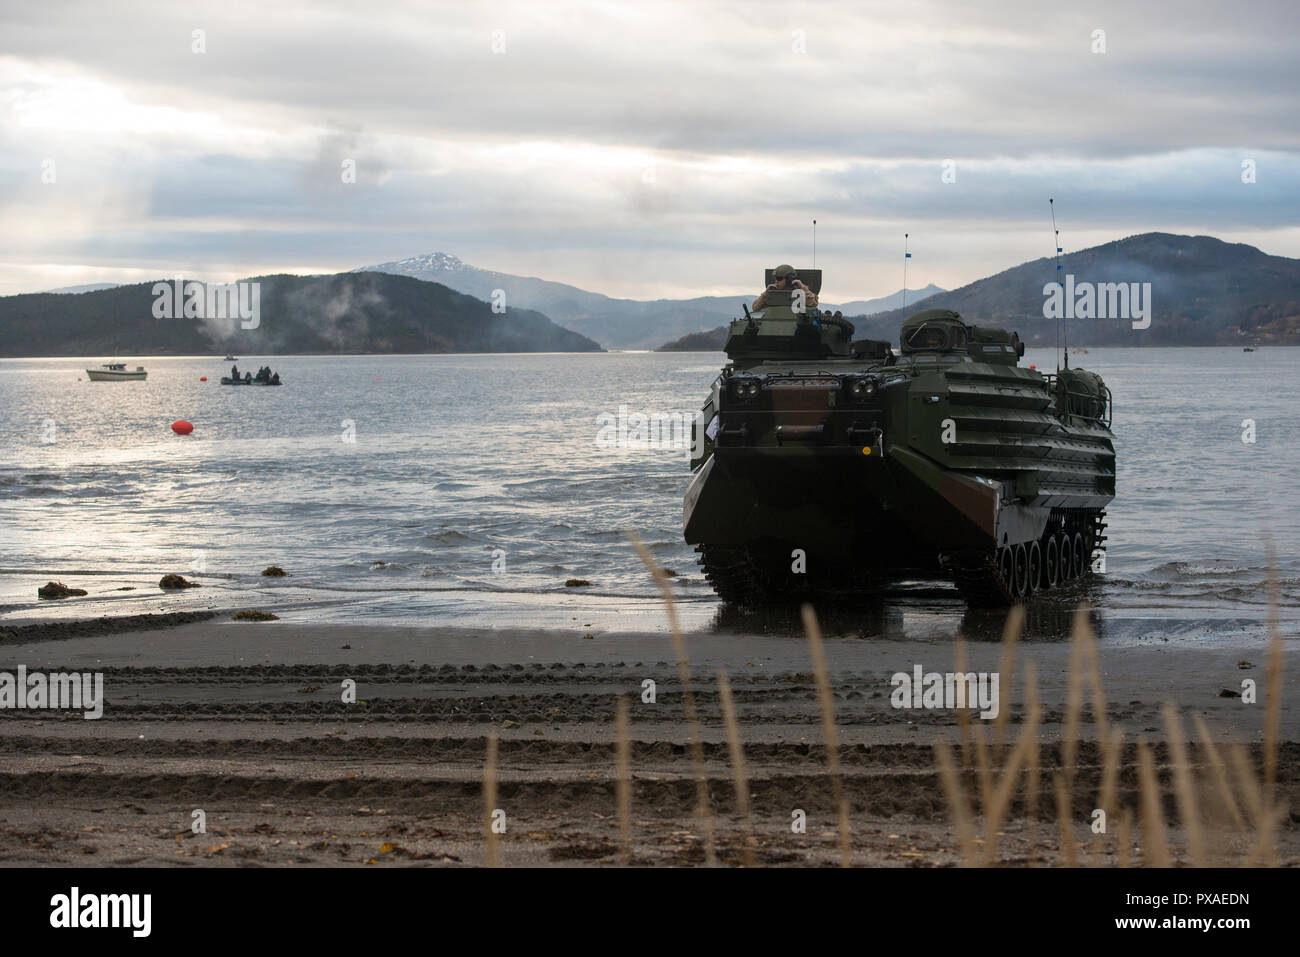 181017-N-VO150-0787 (Oct. 17, 2018)- An assault amphibious vehicle from 2nd Assault Amphibian Battalion, 2nd Marine Division, begins departure of the beach in Bogen, Norway, Oct. 17, 2018, to the marshaling area during Exercise Northern Screen. Northern Screen is a bilateral exercise involving the United States Marine Corps’ Marine Rotational Force-Europe (MRF-E) and Norwegian military, and is taking place in vicinity of Setermoen, Norway, from Oct. 24 to Nov. 7, 2018. (U.S. Navy photo by Mass Communication Specialist 2nd Class Kenneth Gardner/Released) Stock Photo